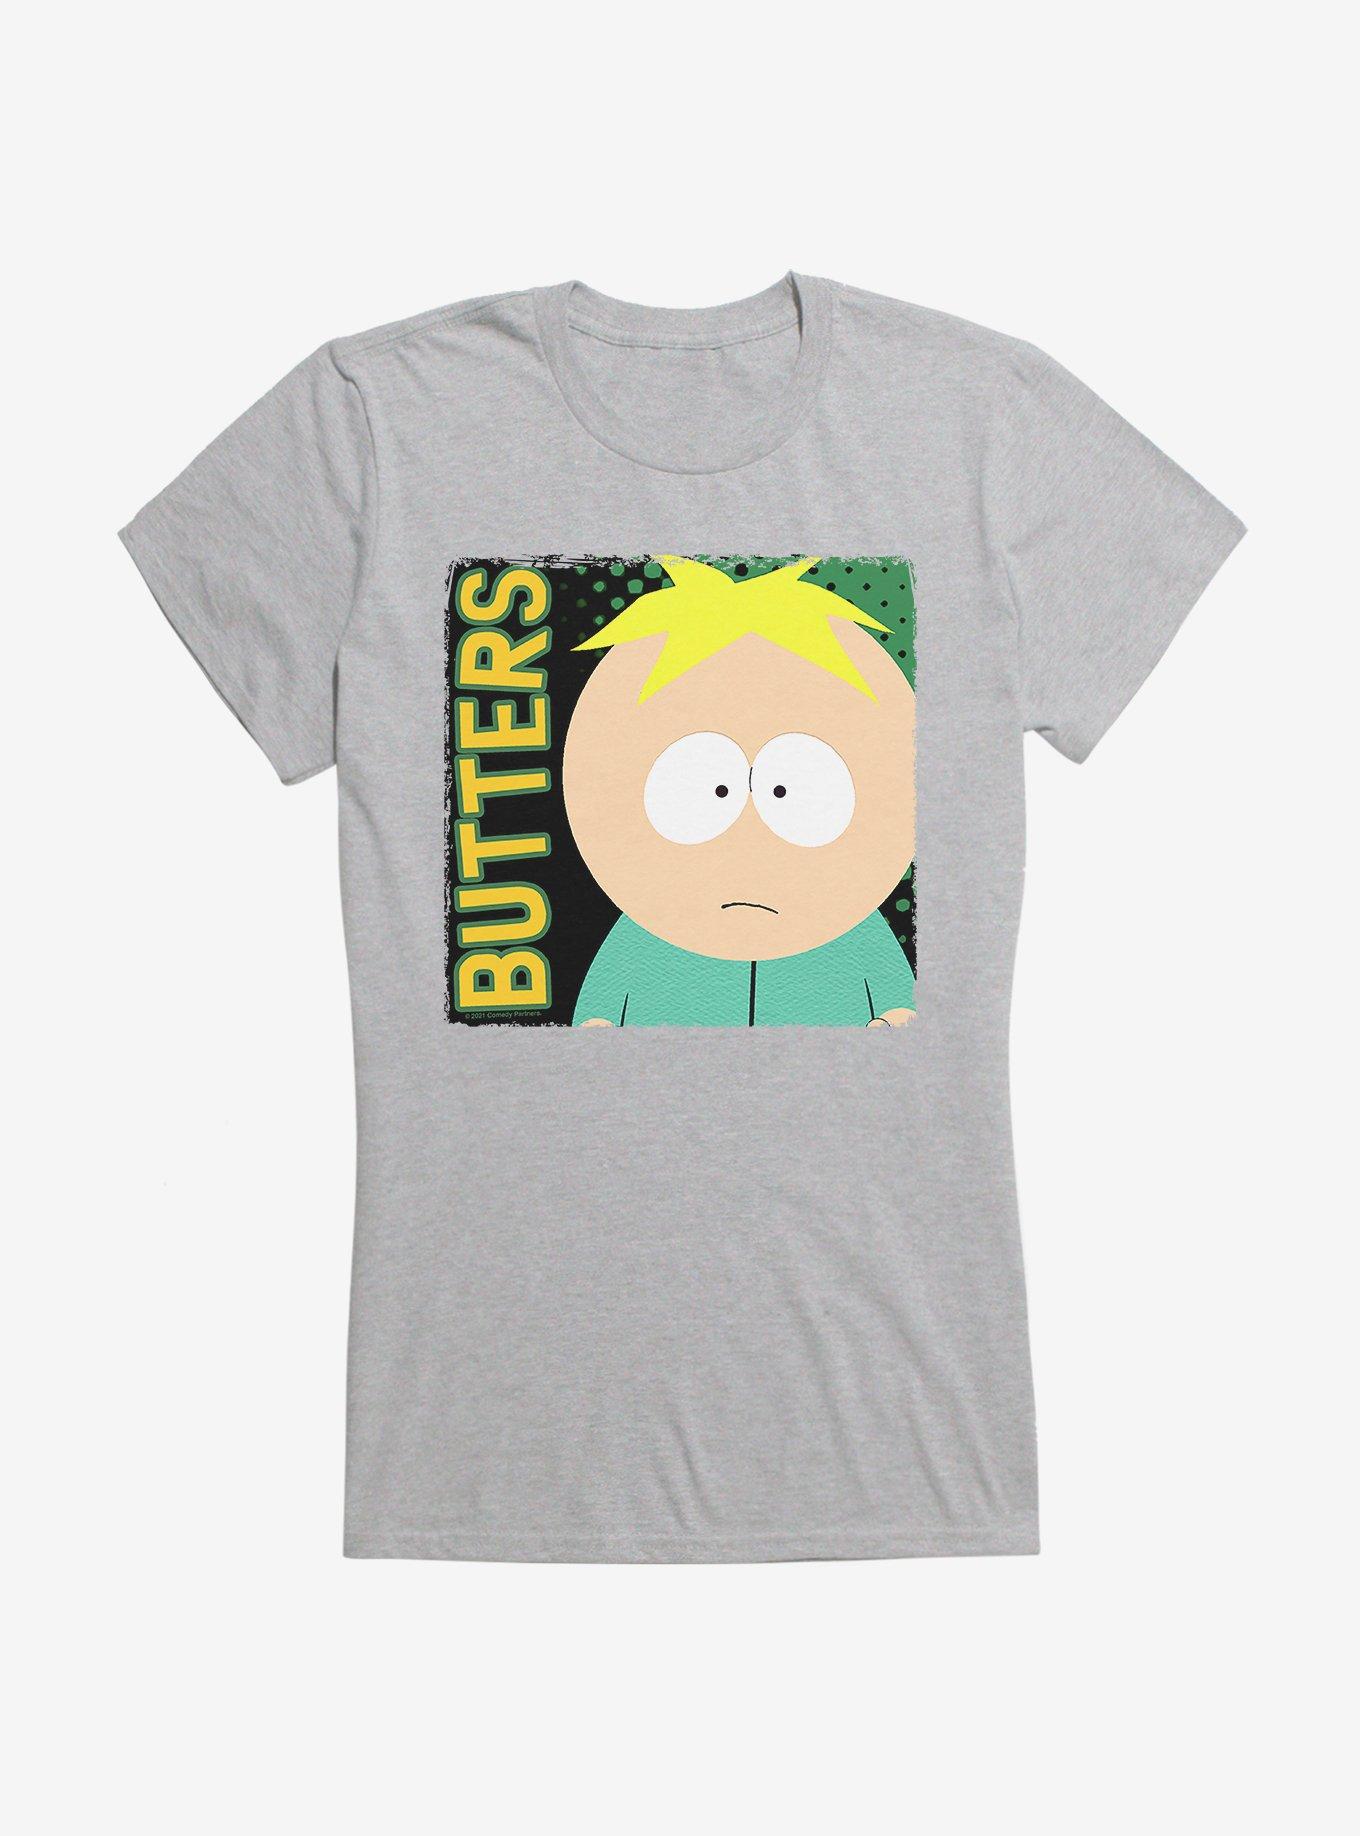 South Park Butters Intro Girls T-Shirt, HEATHER, hi-res